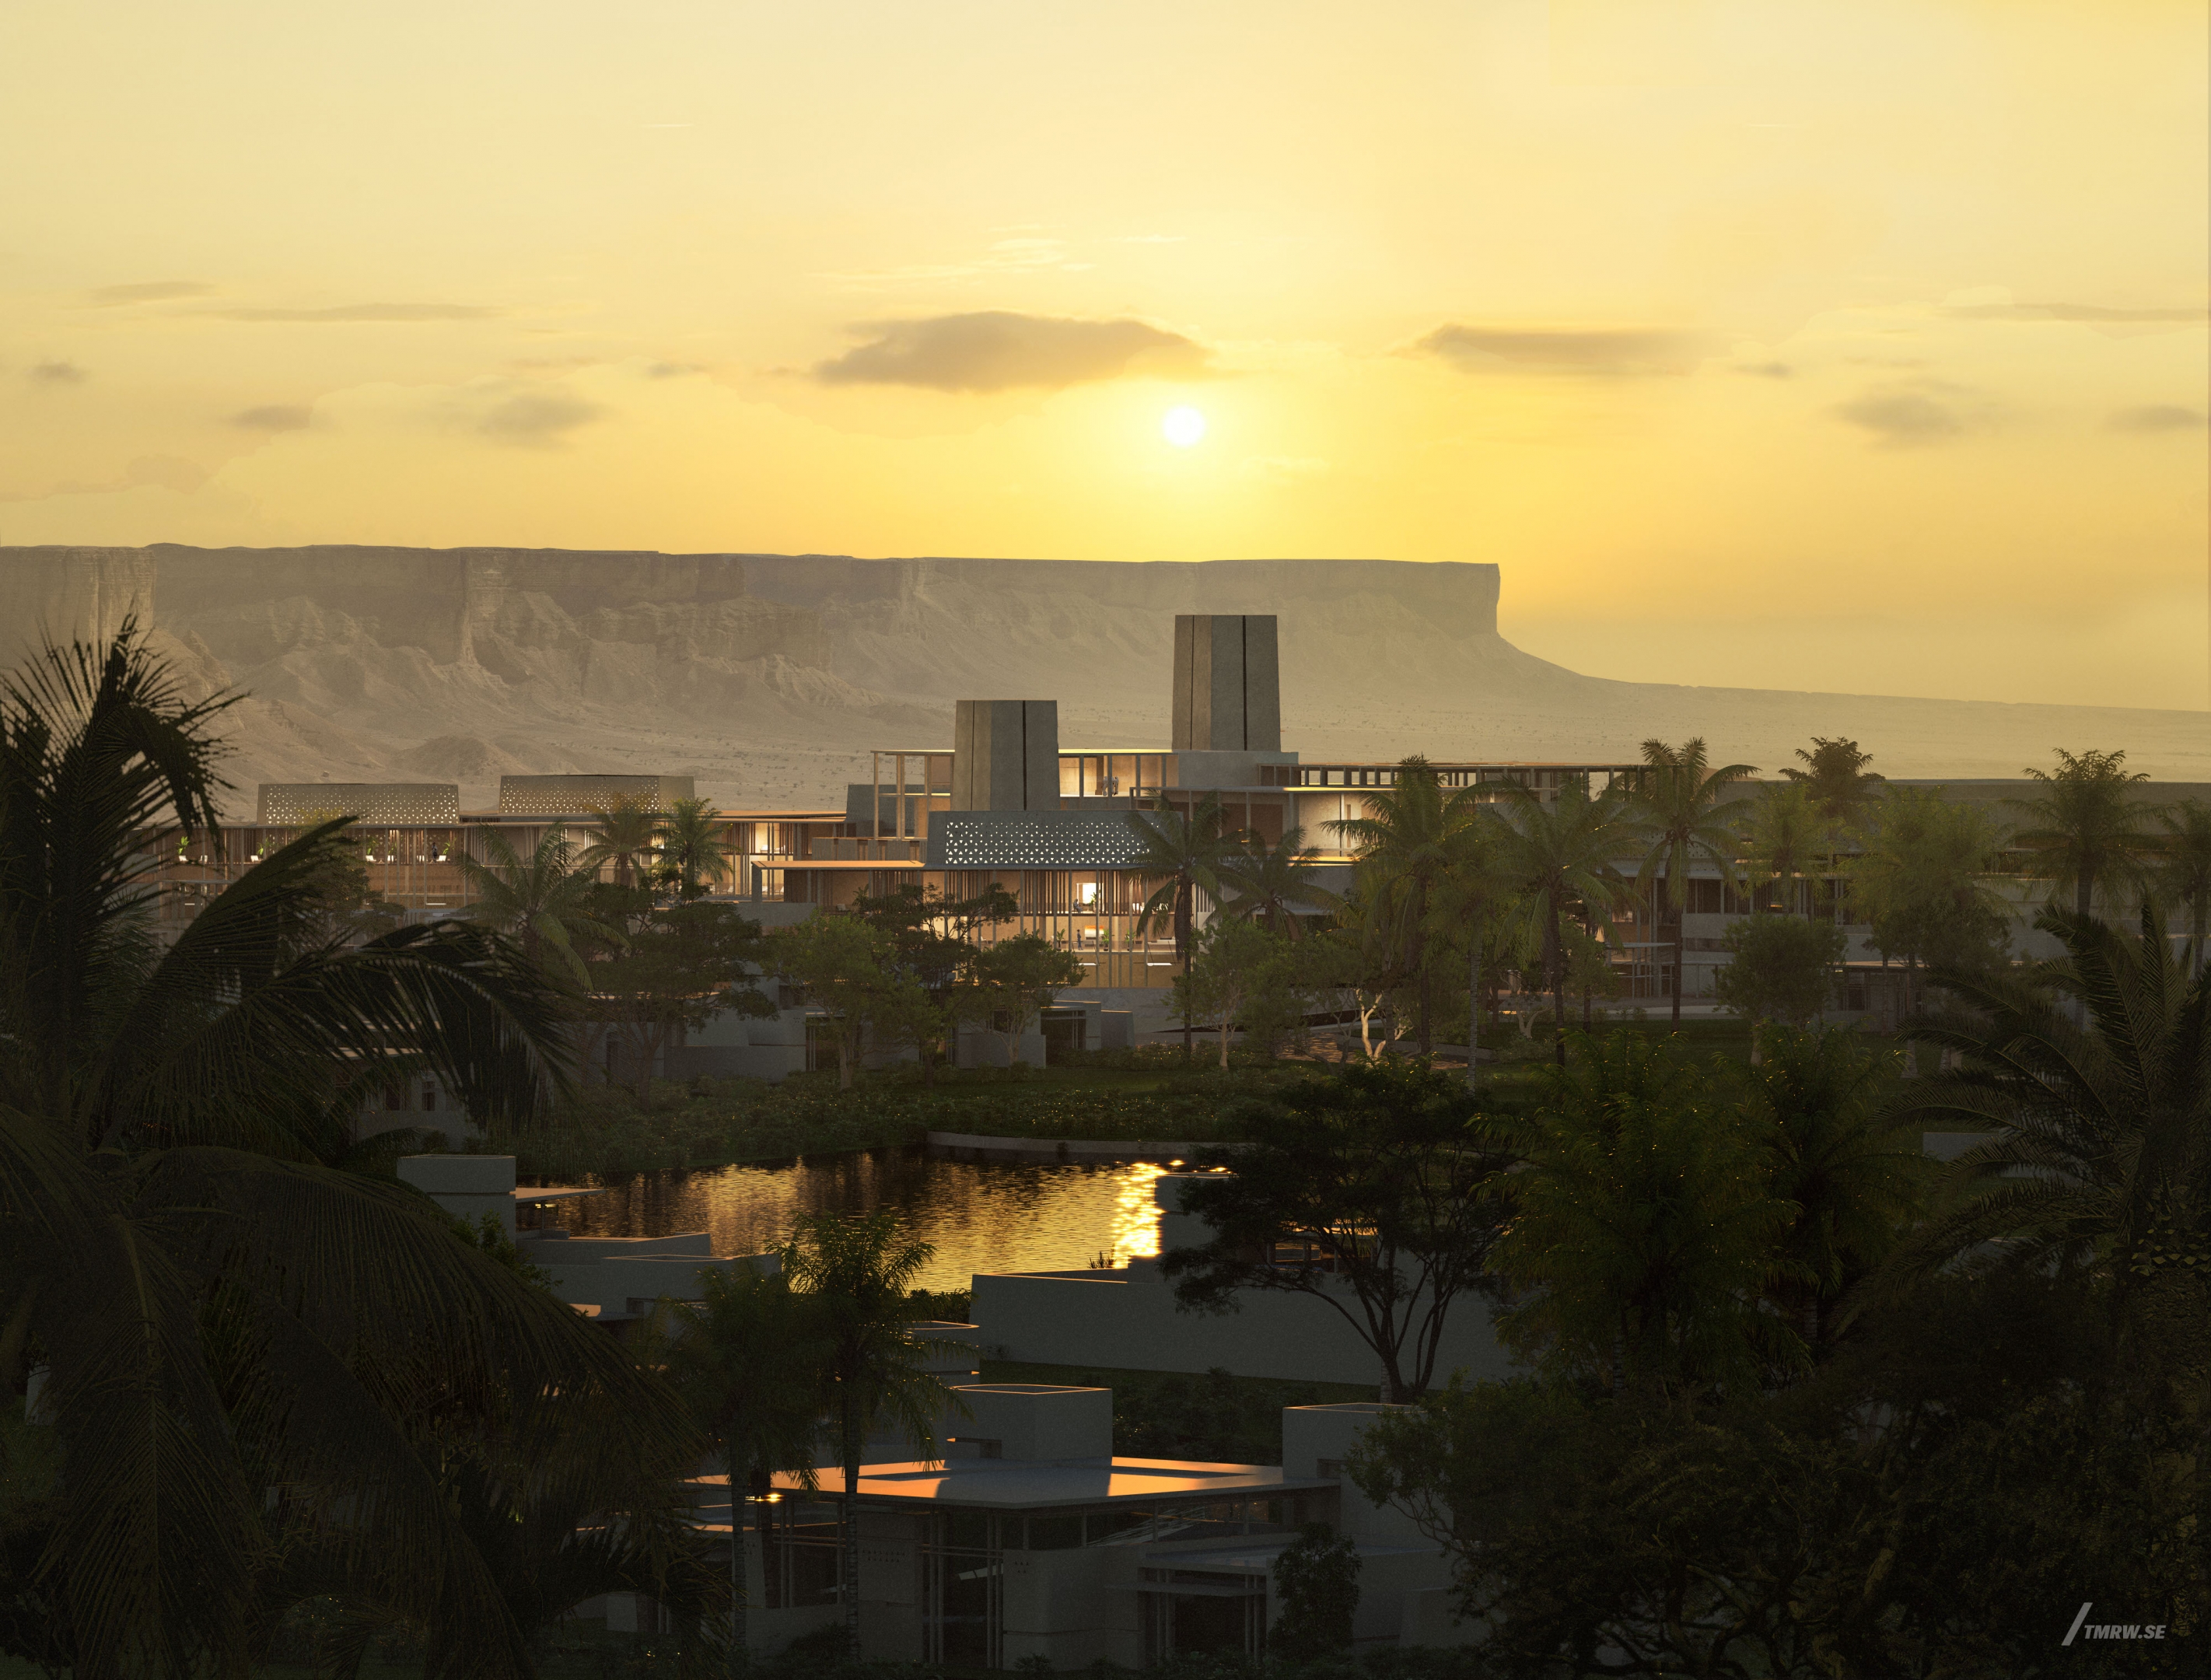 Architectural visualization of Qiddiya for HKS. An image of a hotel complex with a swimming pool in the middle surrounded by palm trees.